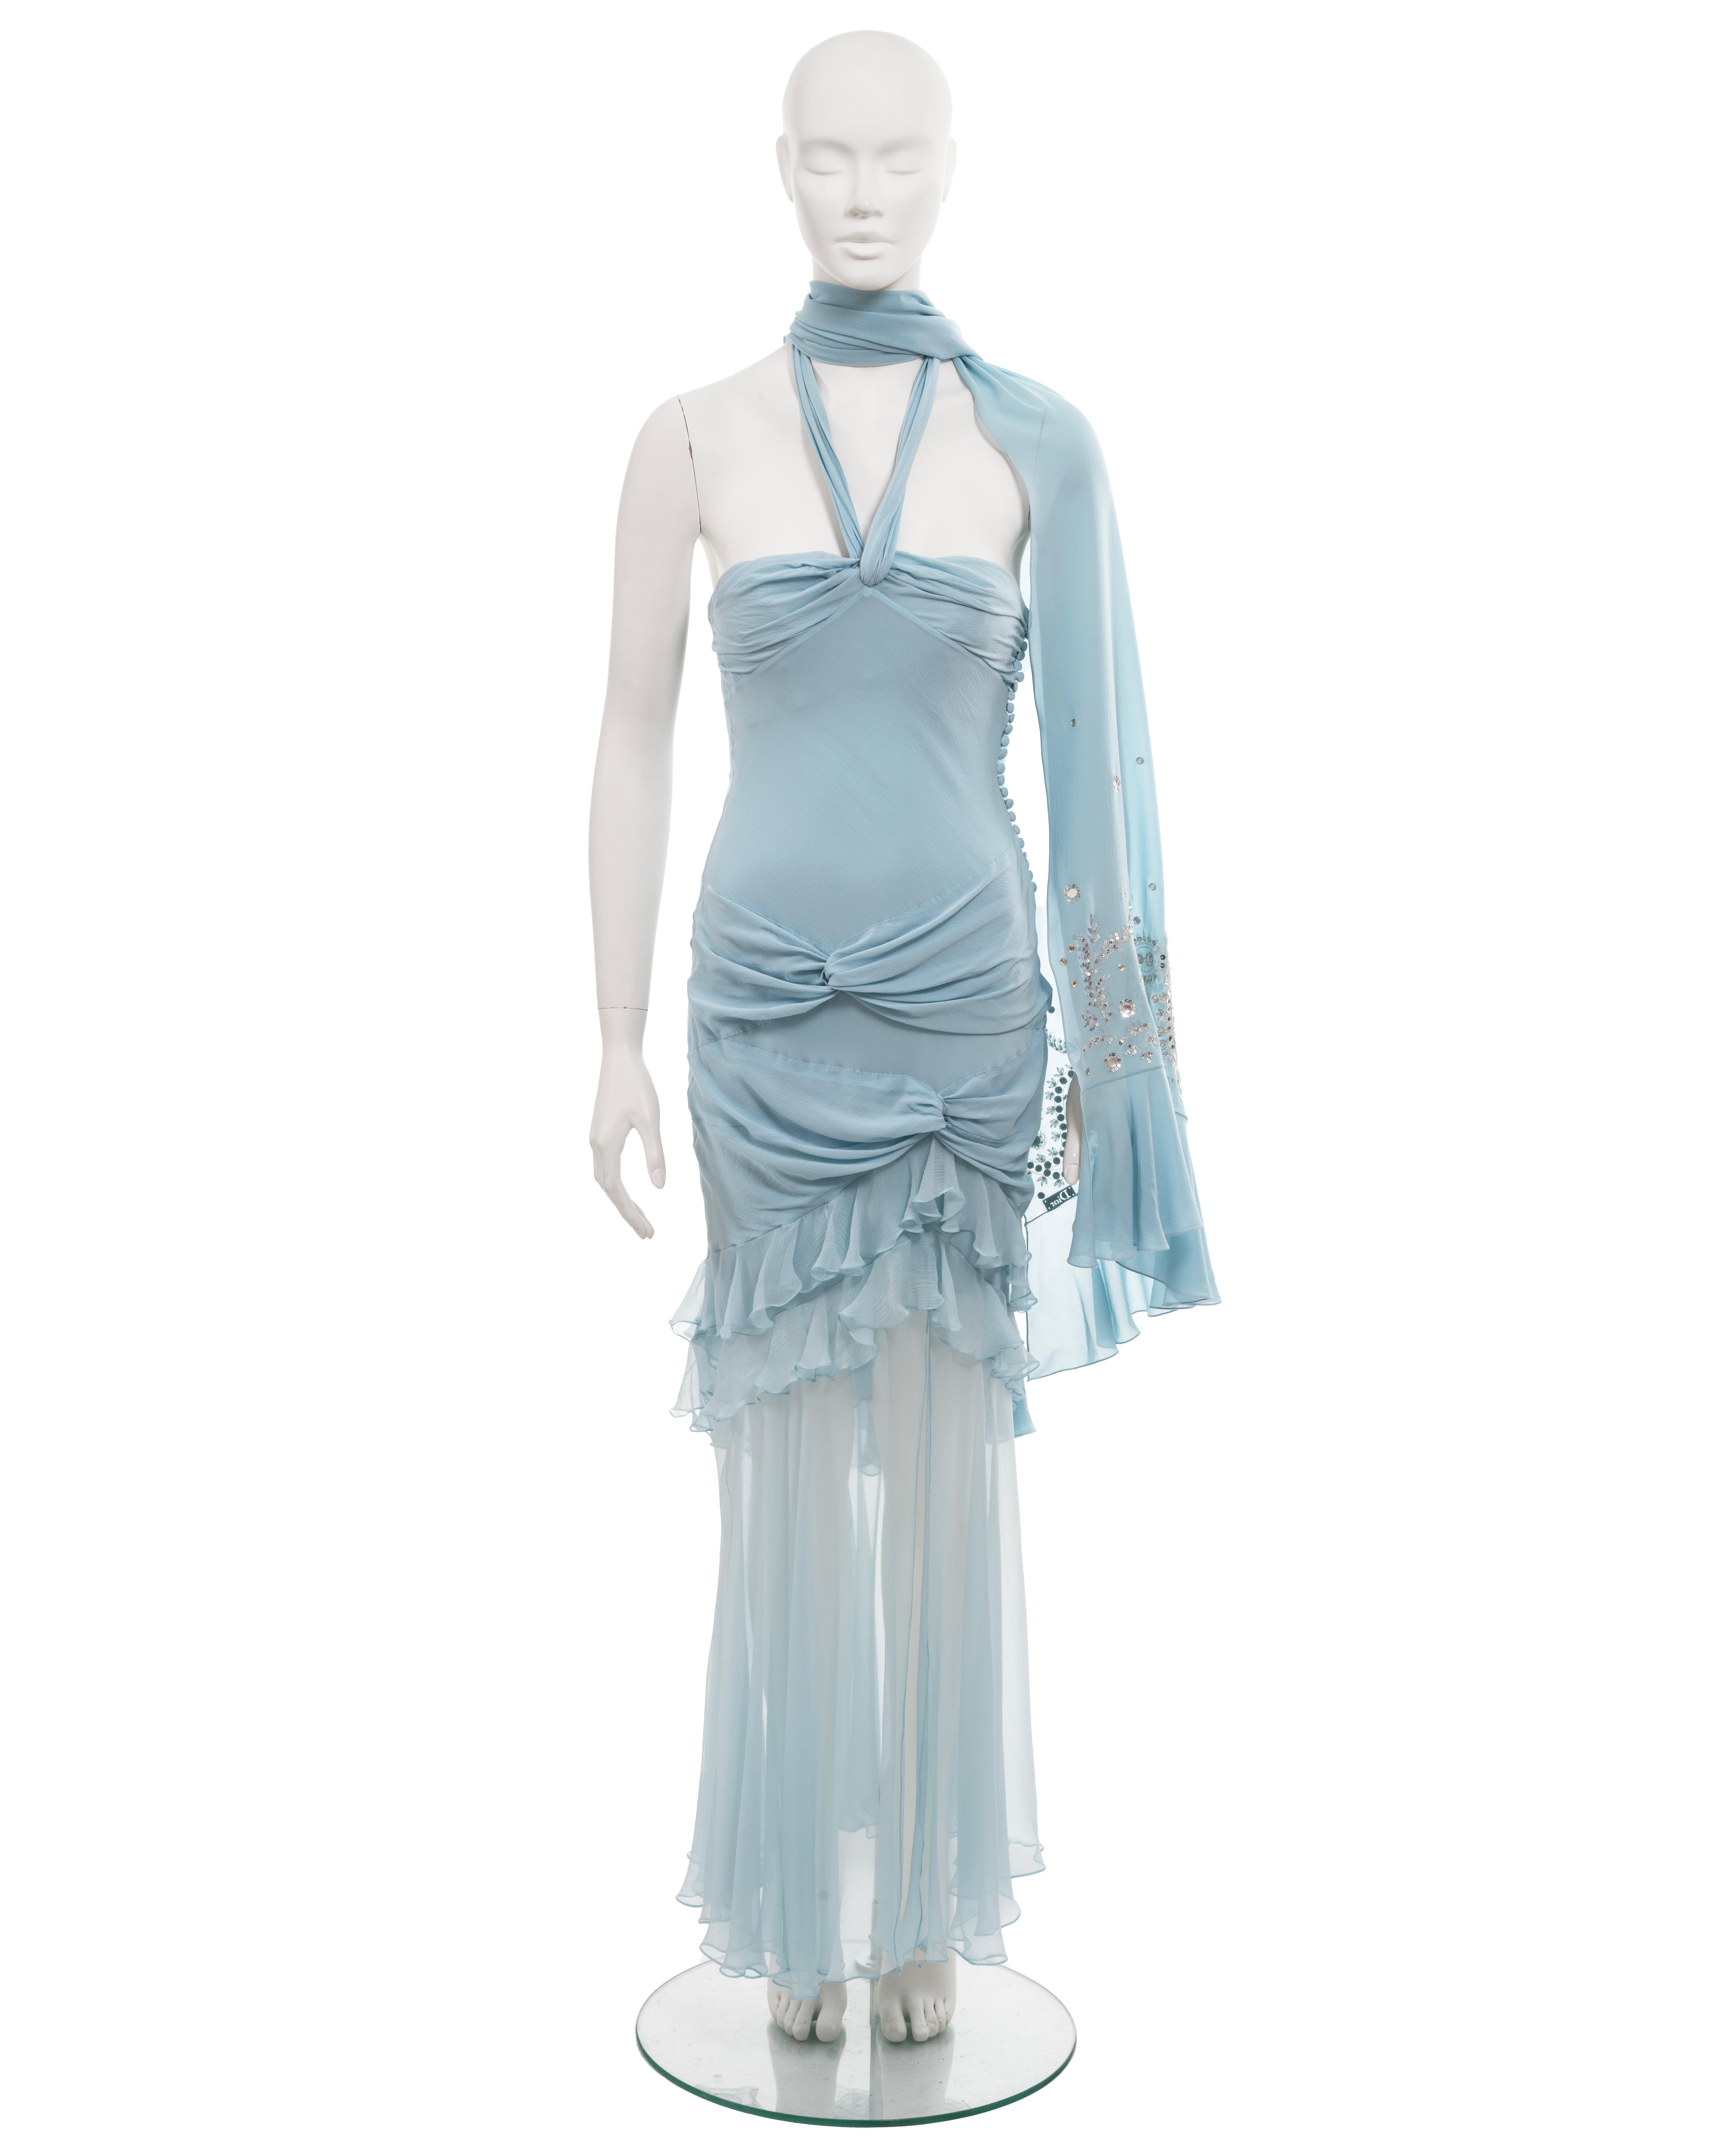 ▪ Christian Dior evening dress 
▪ Creative Director: John Galliano 
▪ Spring-Summer 2004
▪ Sold by One of a Kind Archive 
▪ Pale blue silk chiffon  
▪ Halterneck  
▪ Drapes at the chest and hips  
▪ Built-in cotton-tulle bra  
▪ Tiered ruffled skirt